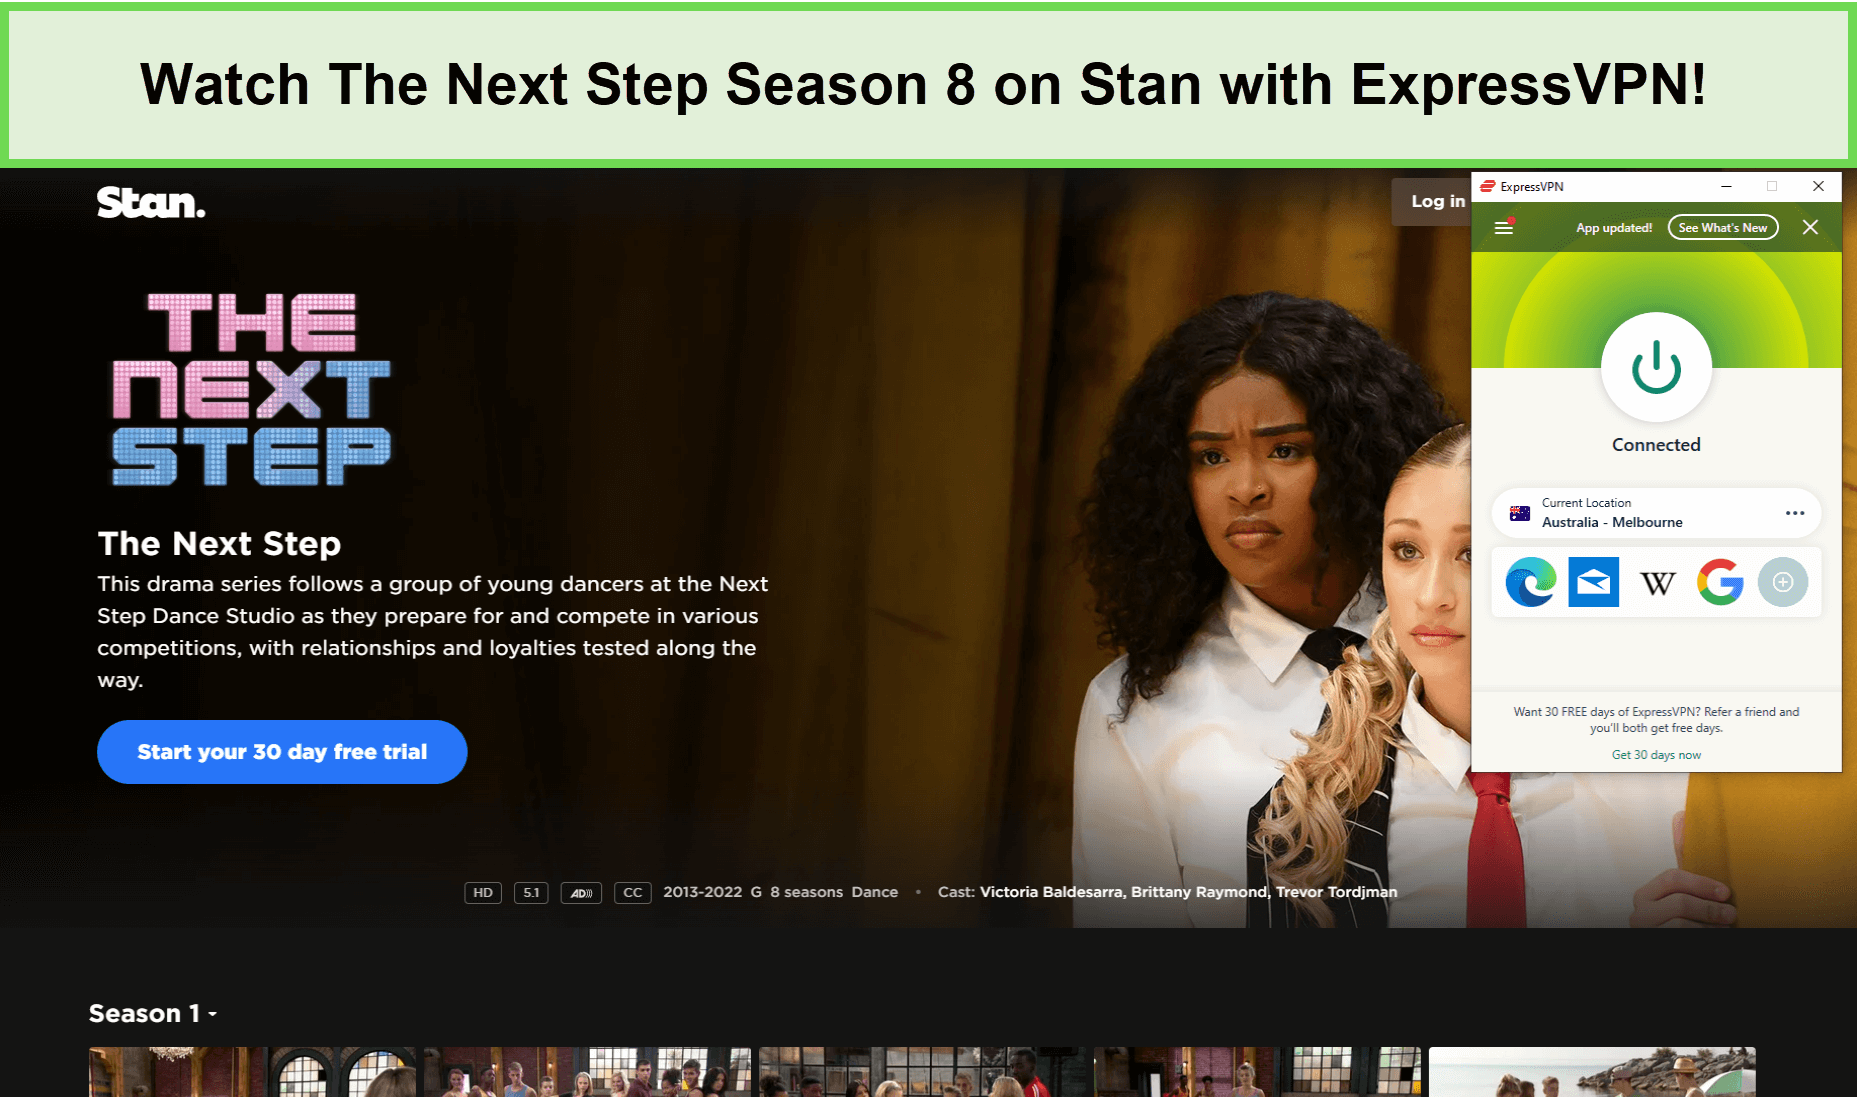 Watch-The-Next-Step-Season-8-in-Italy-on-Stan-with-ExpressVPN